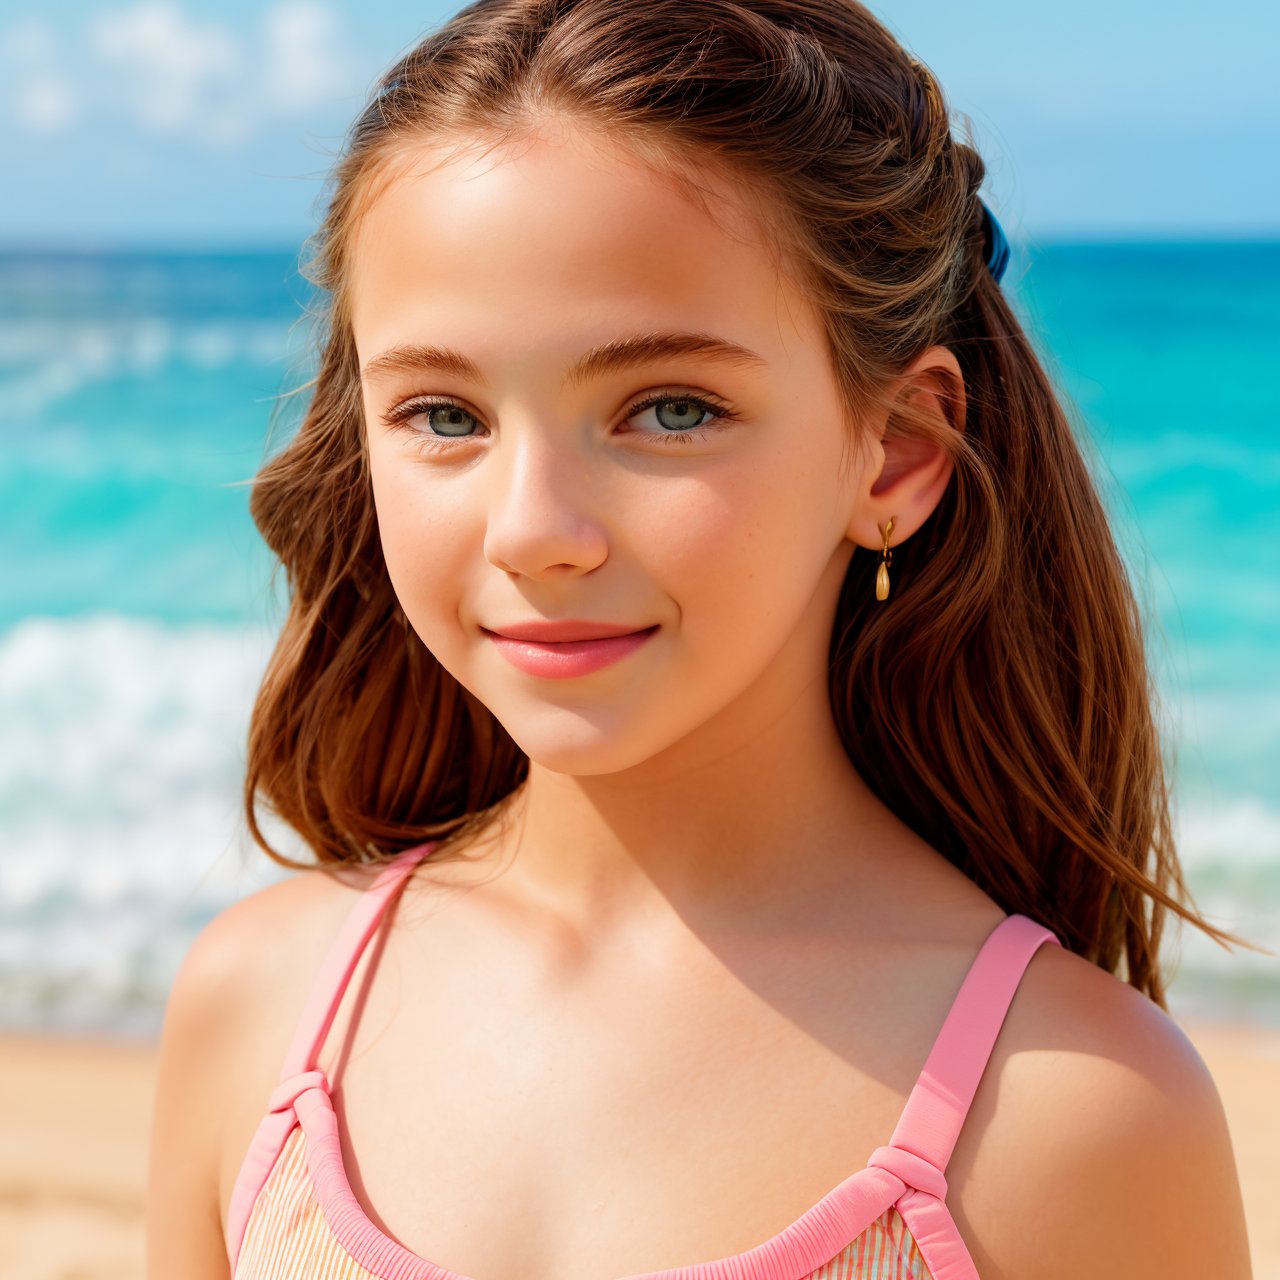 (masterpiece:1.3), best quality, view from above, close up portrait of adorable (AIDA_LoRA_arusso:1.15) <lora:AIDA_LoRA_arusso:0.74> in a one peace swimsuit posing on the beach, sea and sky on the background, sunlight, outdoors, little girl, pretty face, naughty, funny, happy, playful, intimate, flirting with camera, dramatic, studio photo, studio photo, kkw-ph1, hdr, f1.6, getty images, (colorful:1.1)